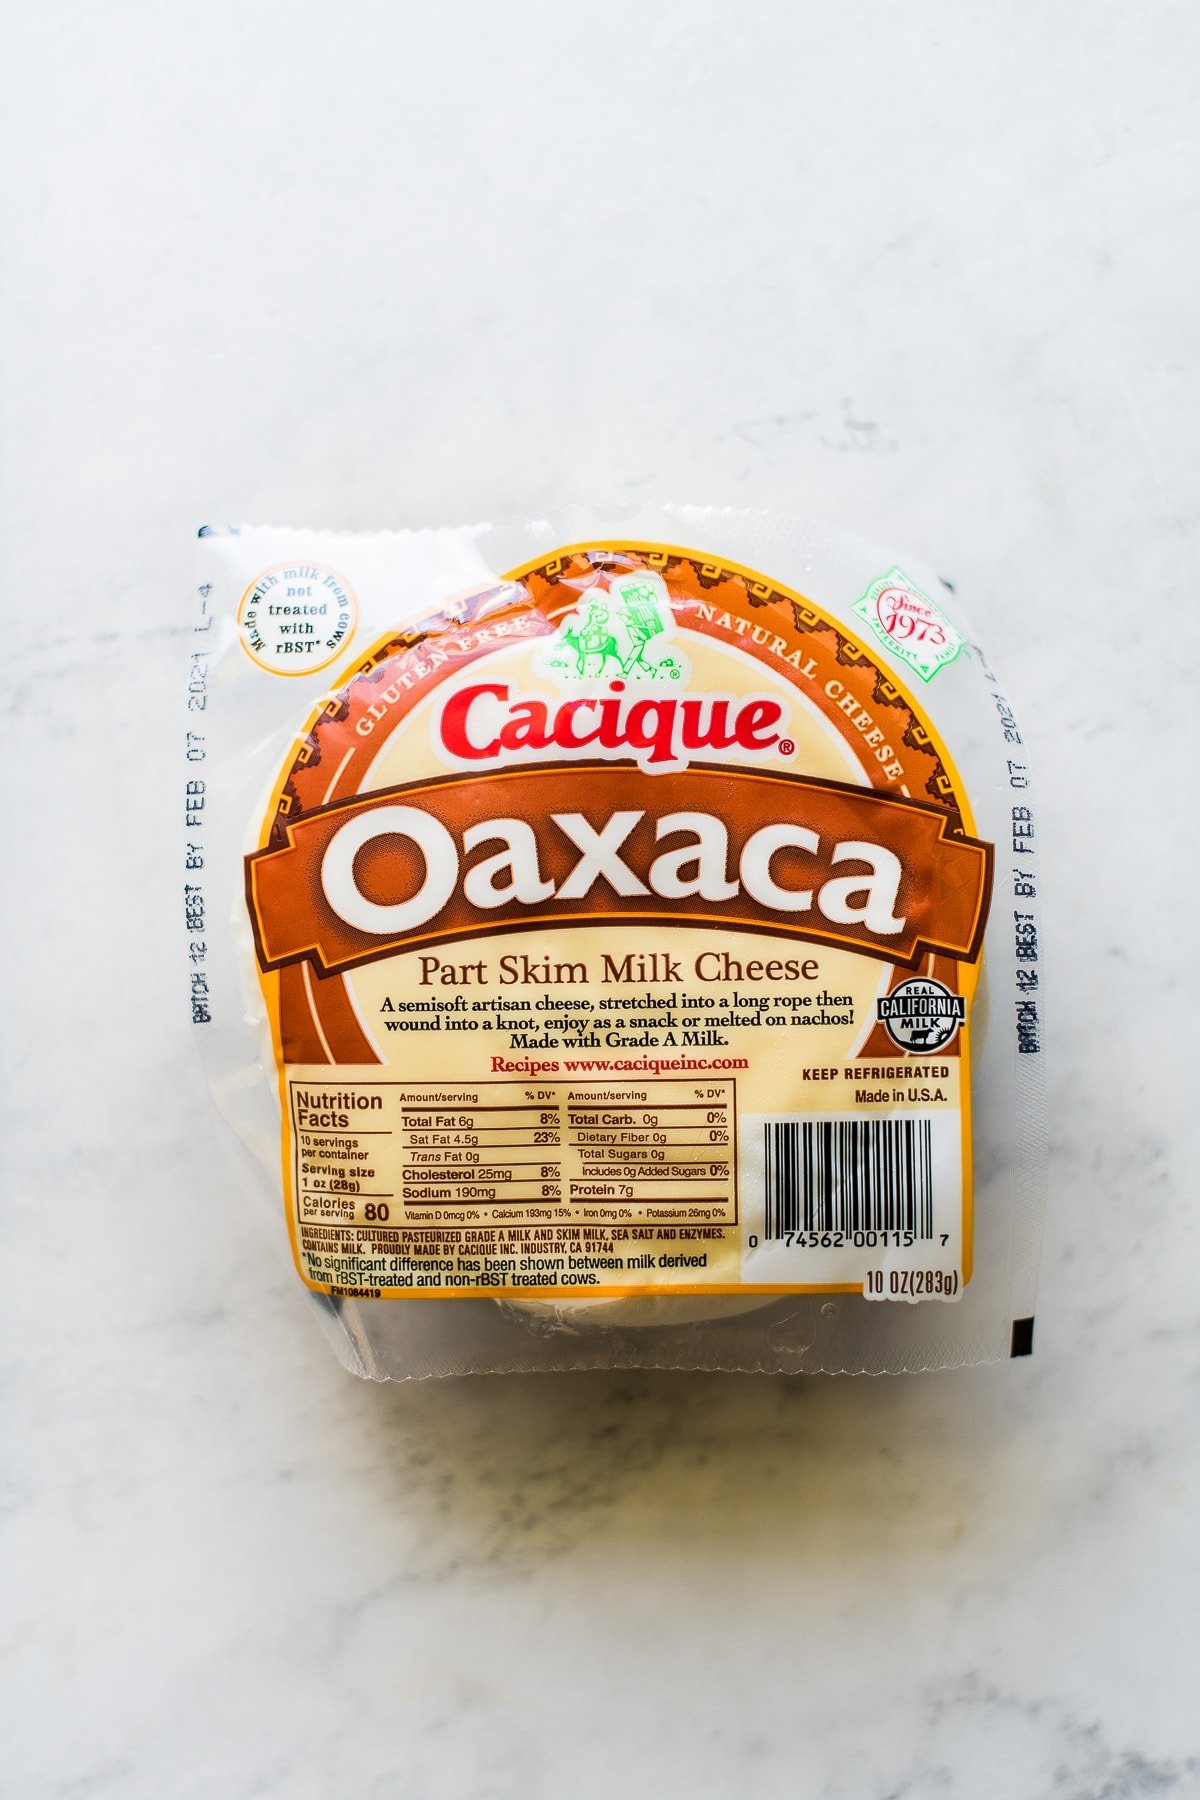 Oaxaca cheese package from Cacique